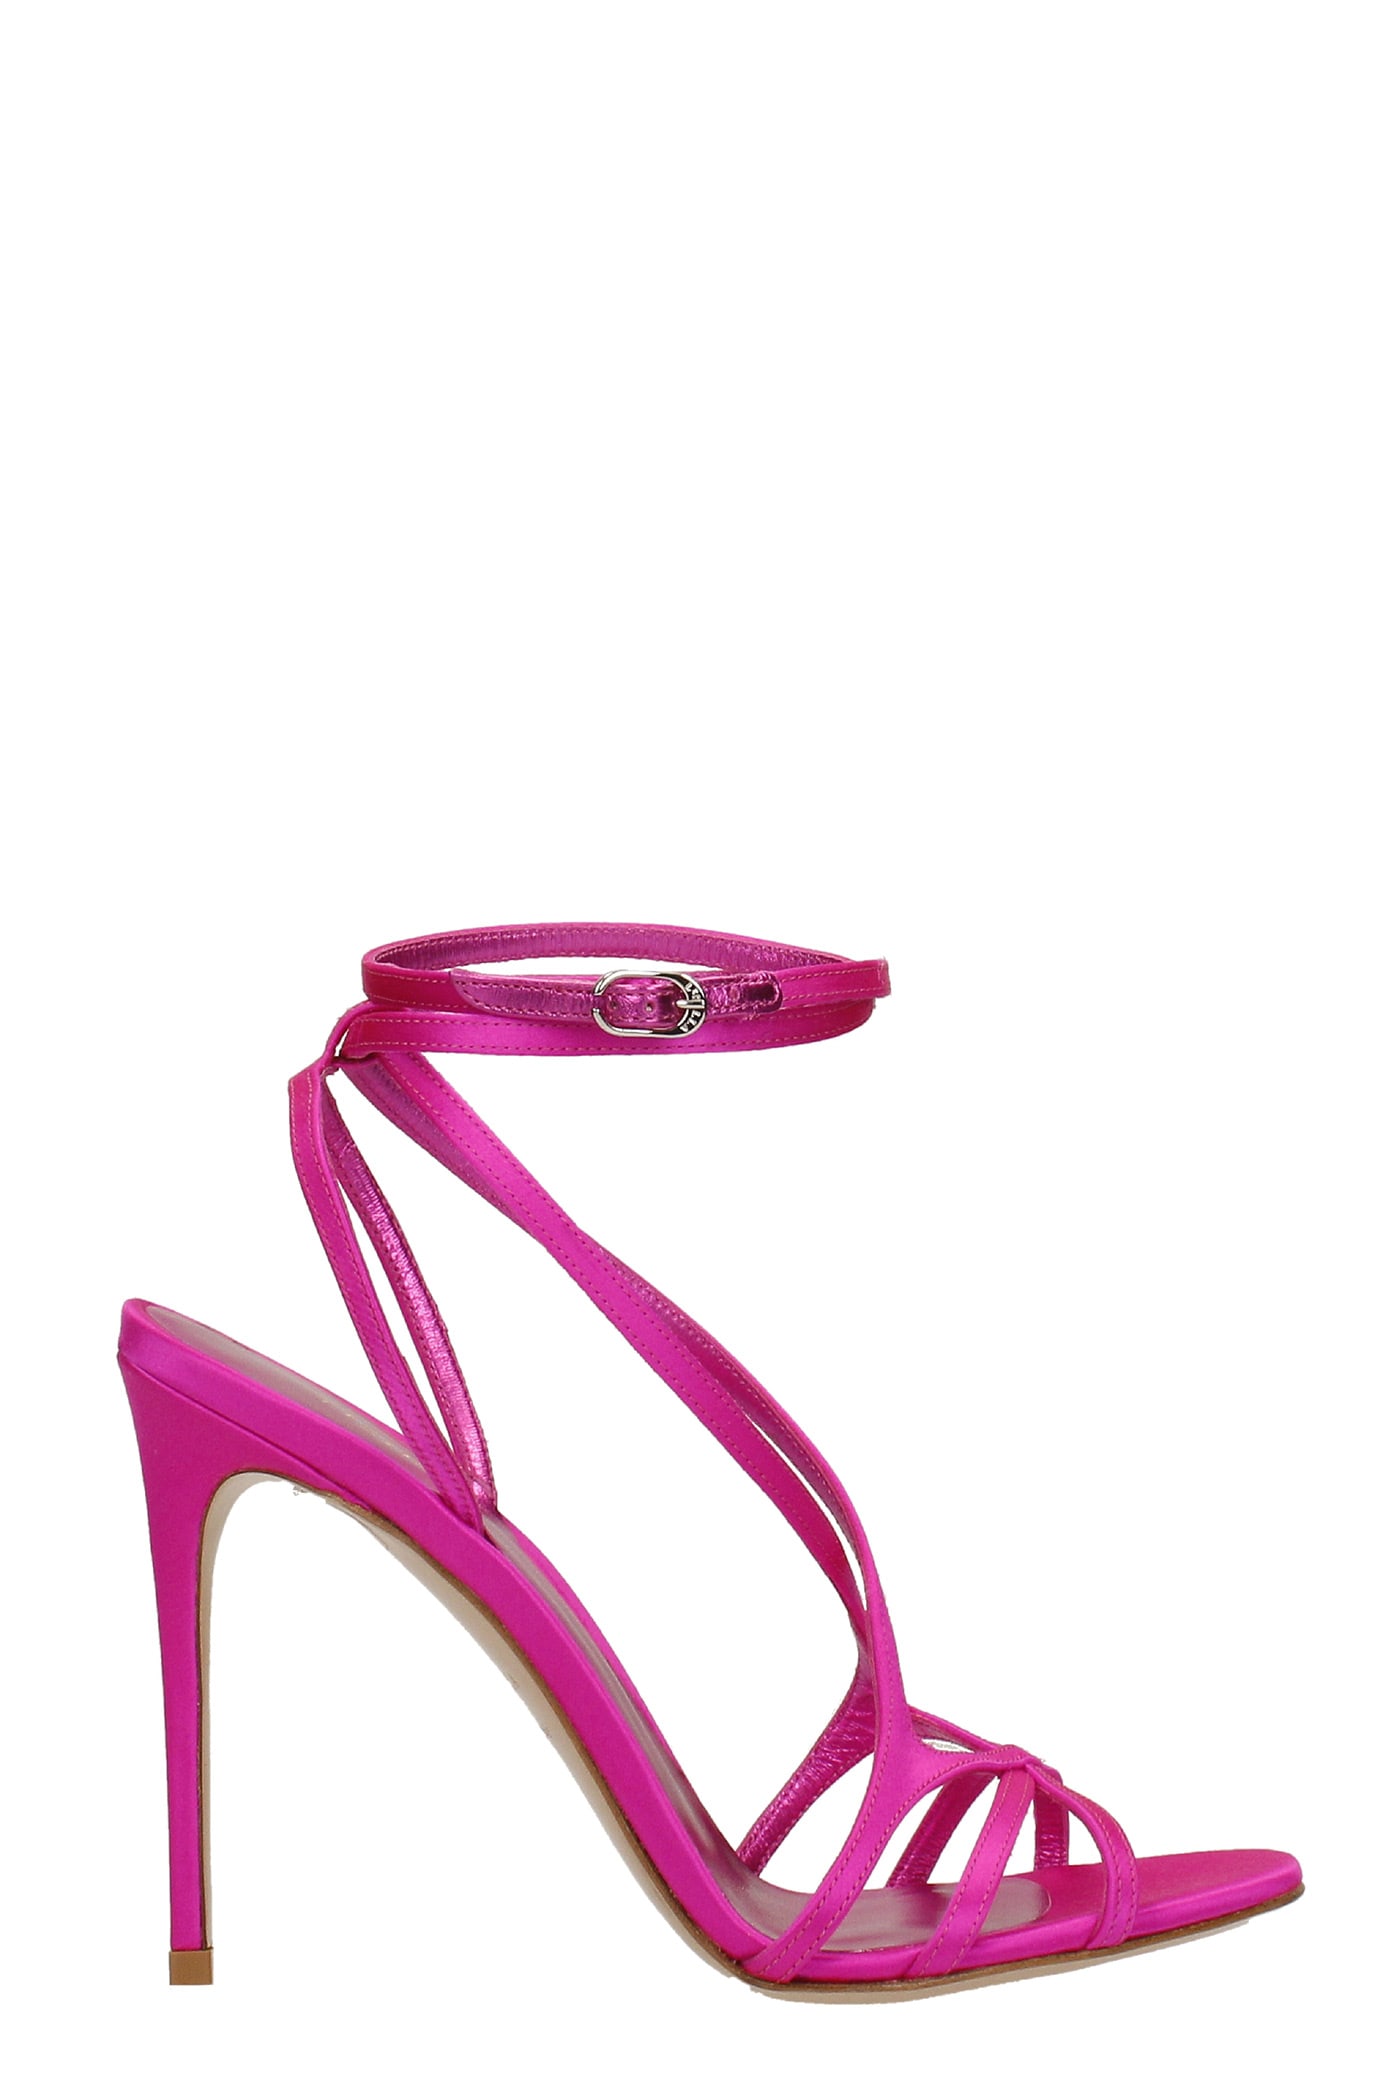 Le Silla Belen Sandals In Fuxia Leather